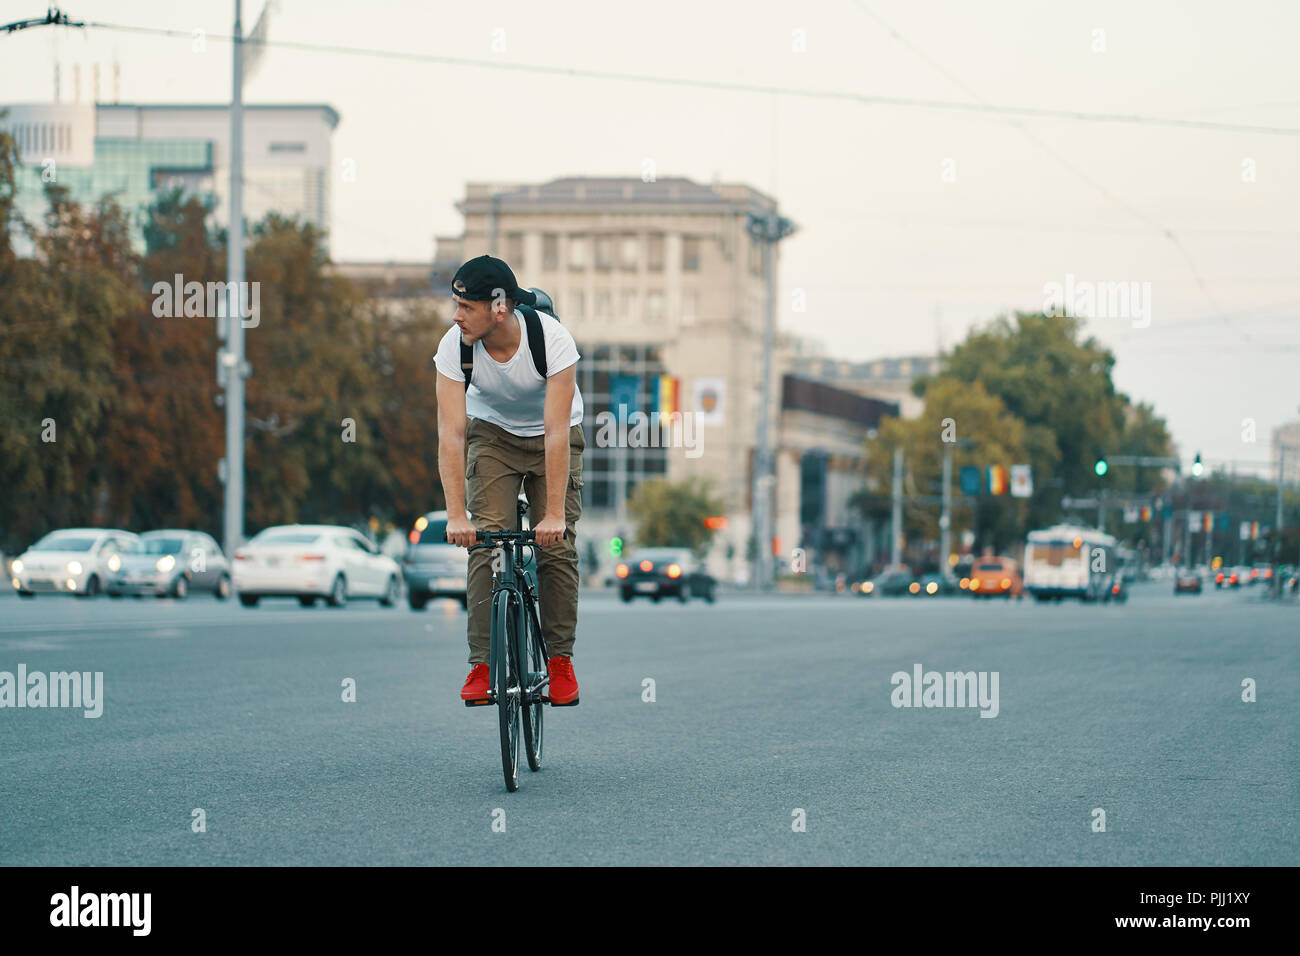 Portrait of a young man riding on bicycle in the city road, street with city far in the background. Male on black bicycle with white shirt, cap, backp Stock Photo